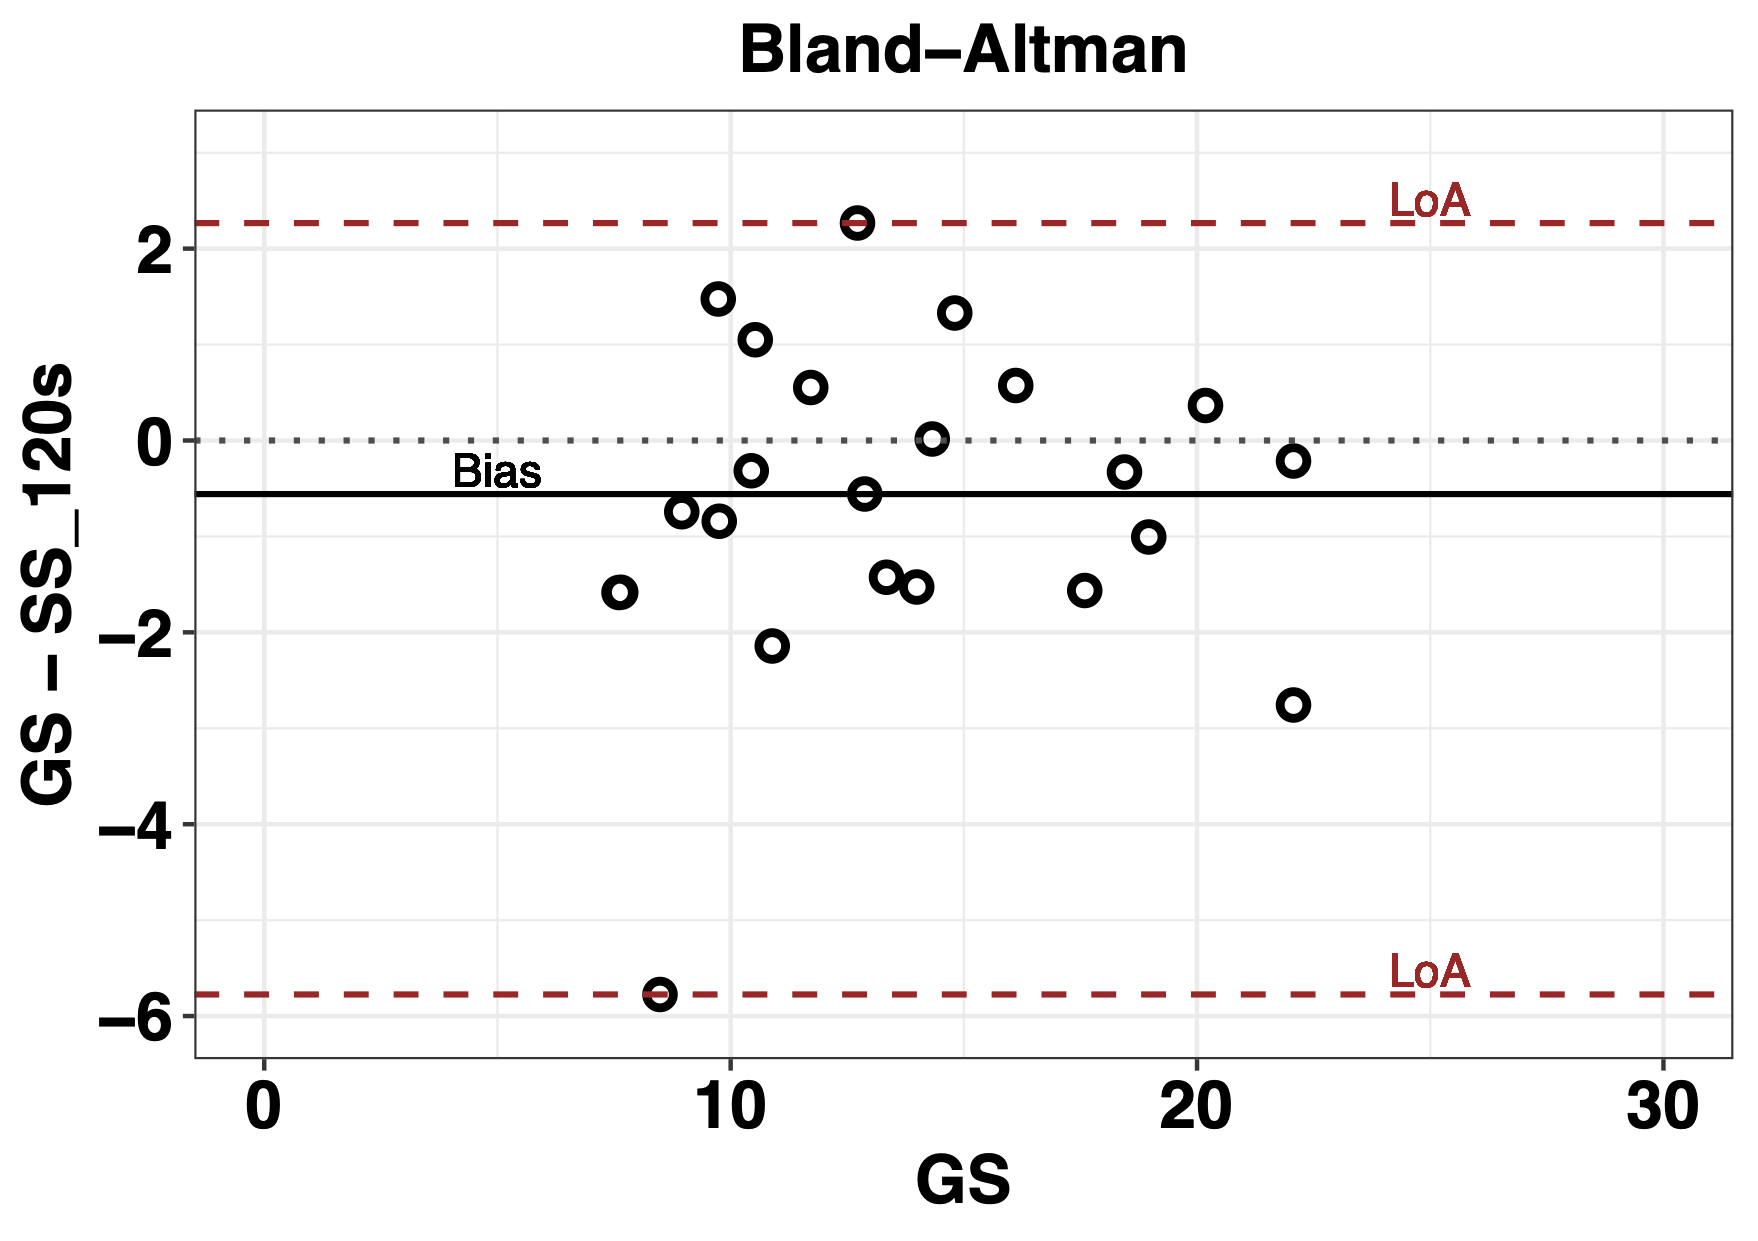 Analysis of the Bland-Altman plot to study the concordance between the GS and the 120 s series of the SS index.